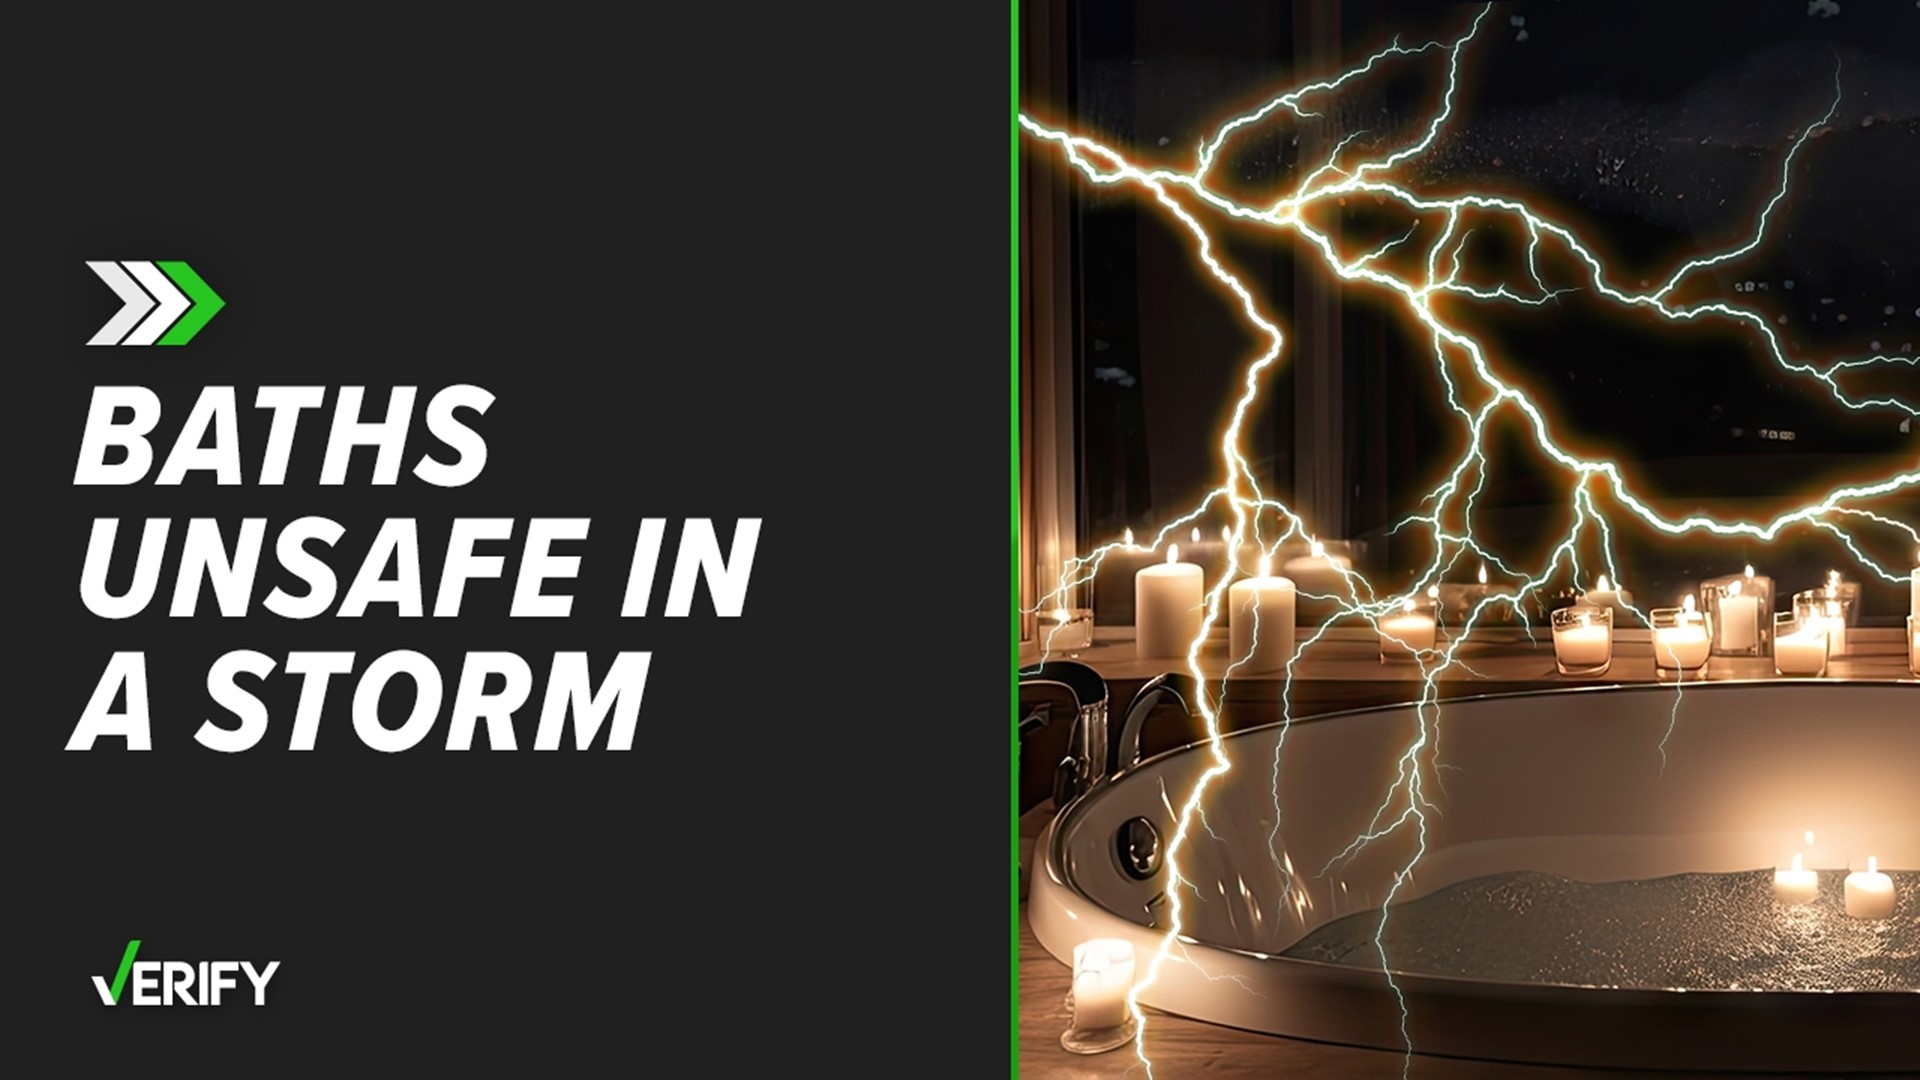 Because metal and water conduct electricity, there’s a chance lightning could travel through pipes and shock a person who’s bathing or taking a shower.